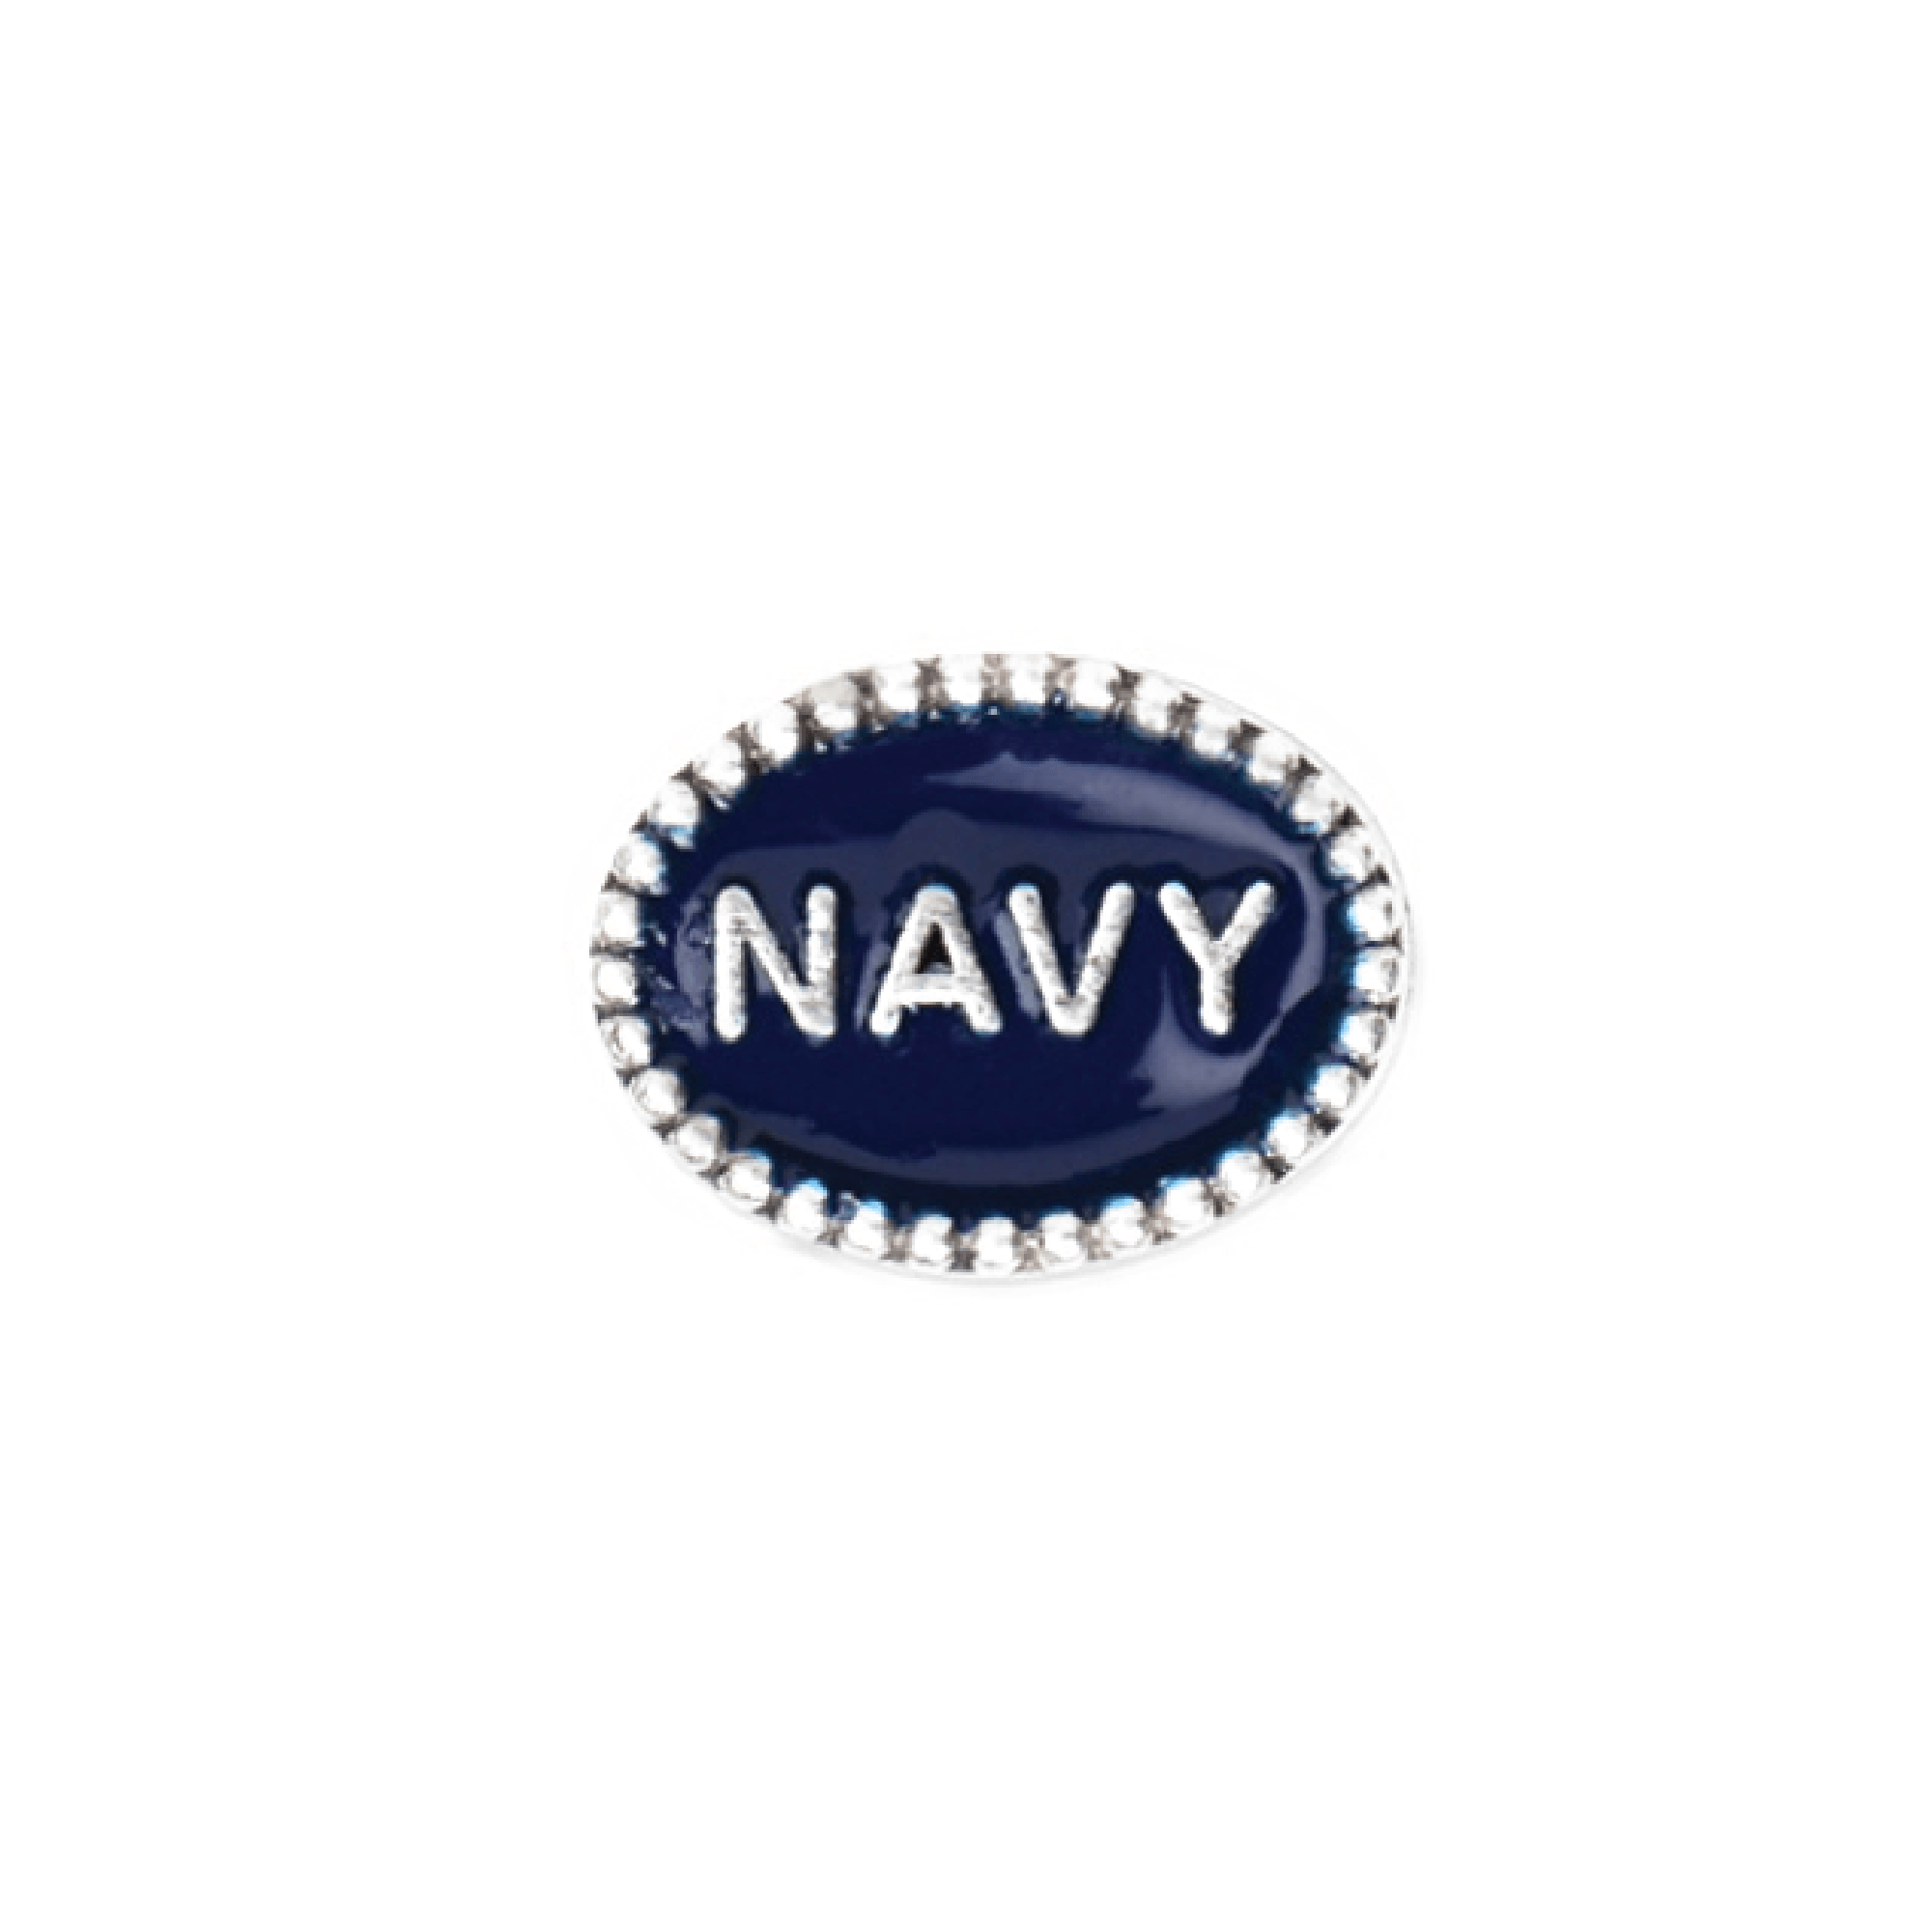 Military Jewelry, Military Charms, Navy, USN, Military Gifts